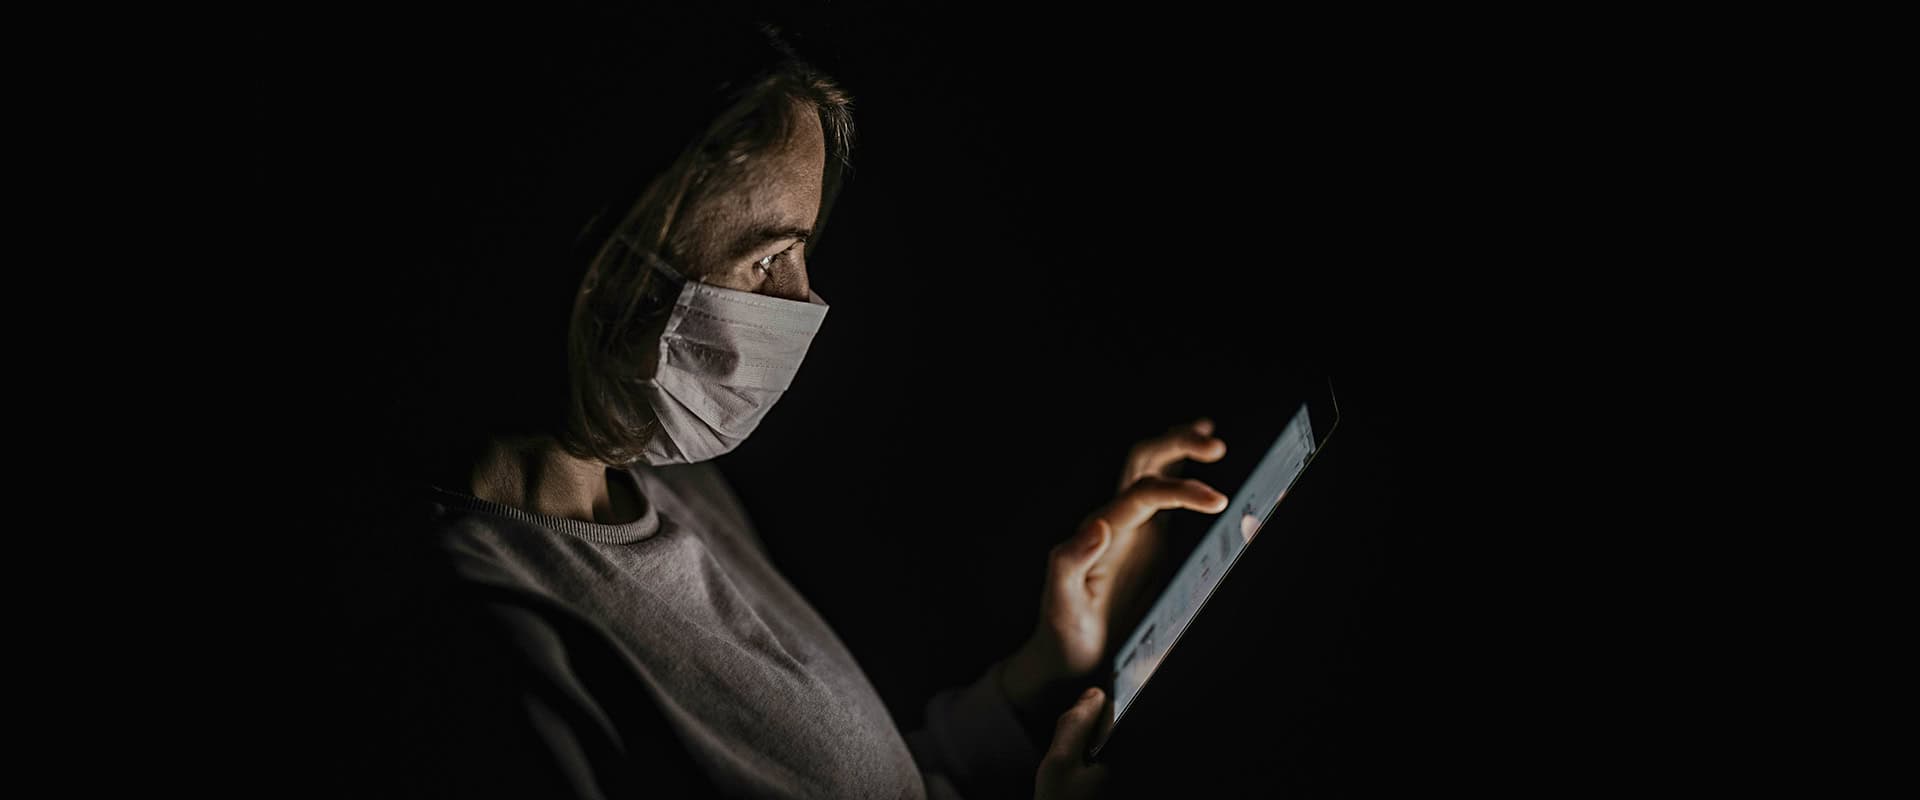 woman in mask on tablet in the dark